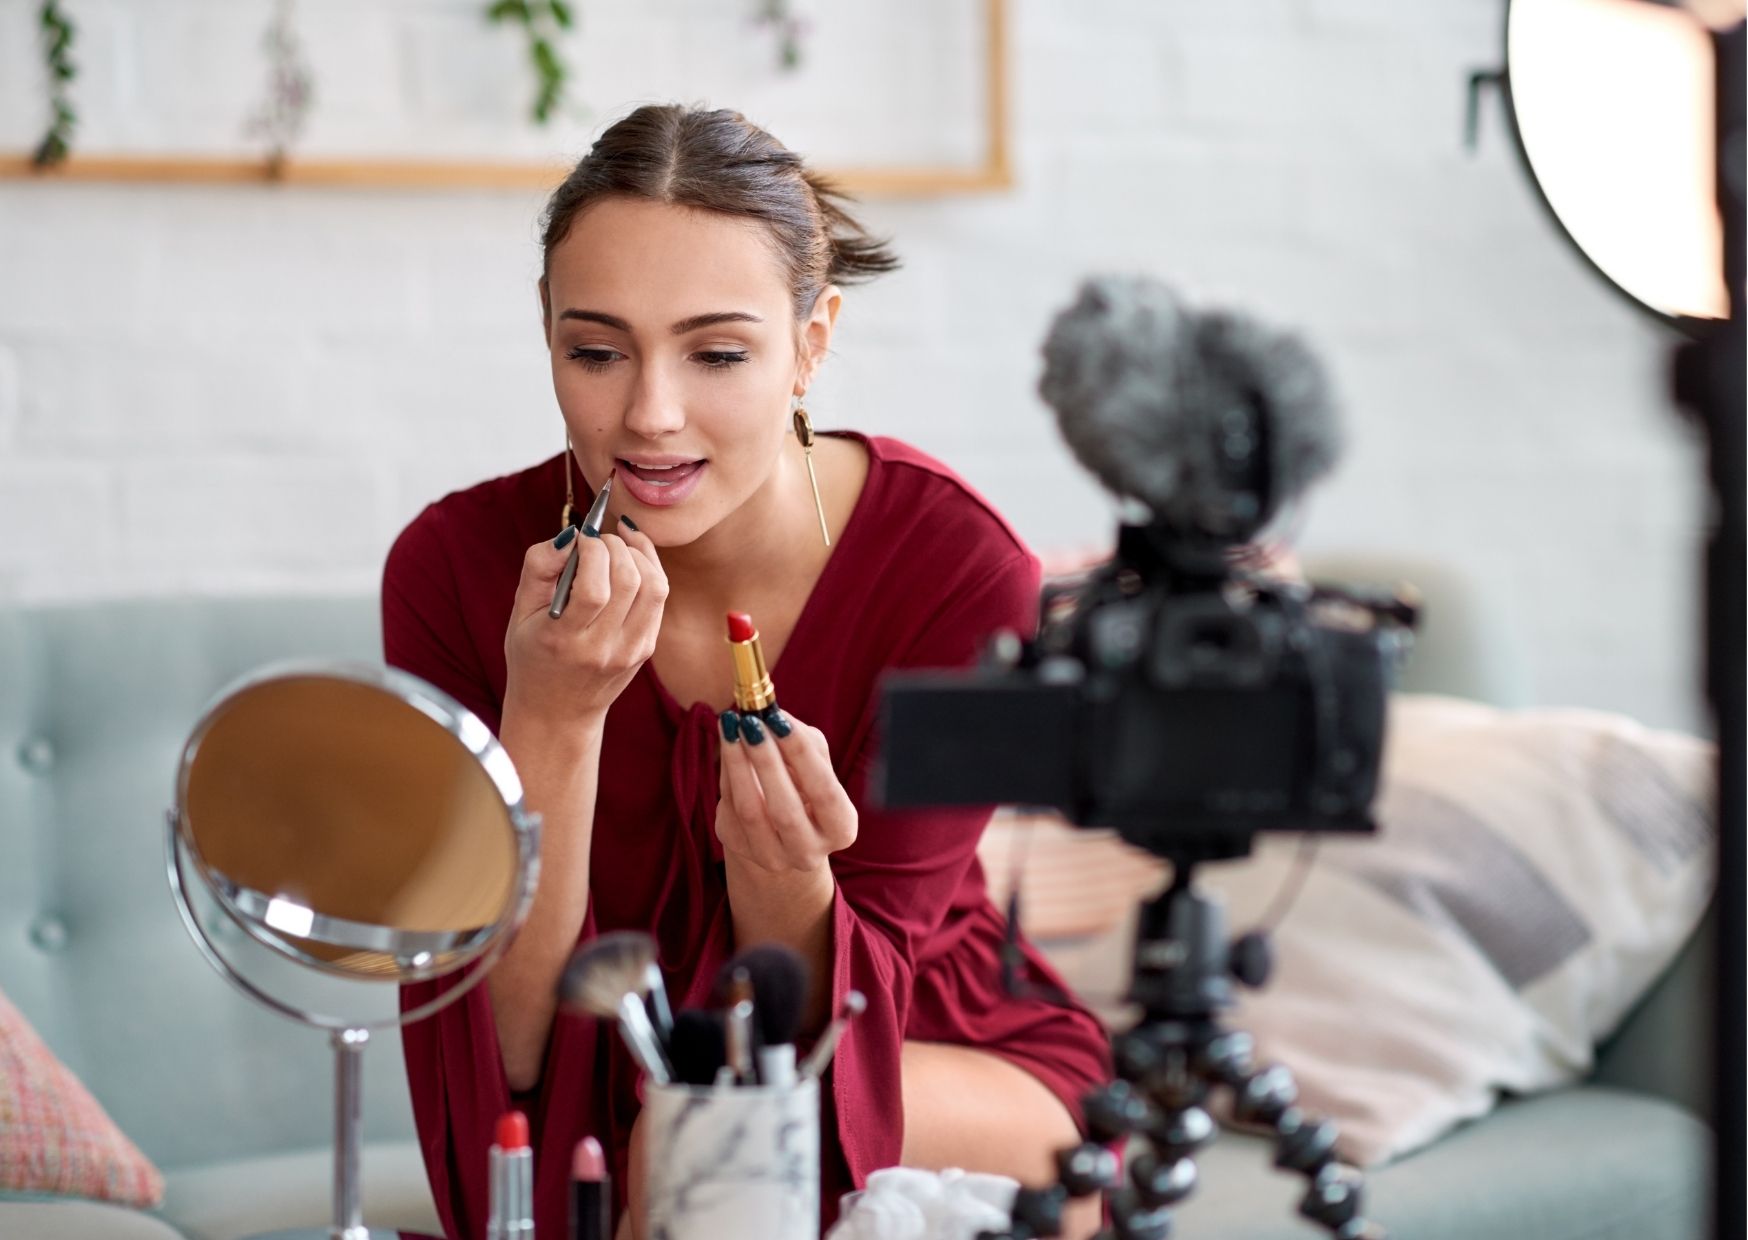 The highest paid beauty influencers in the world